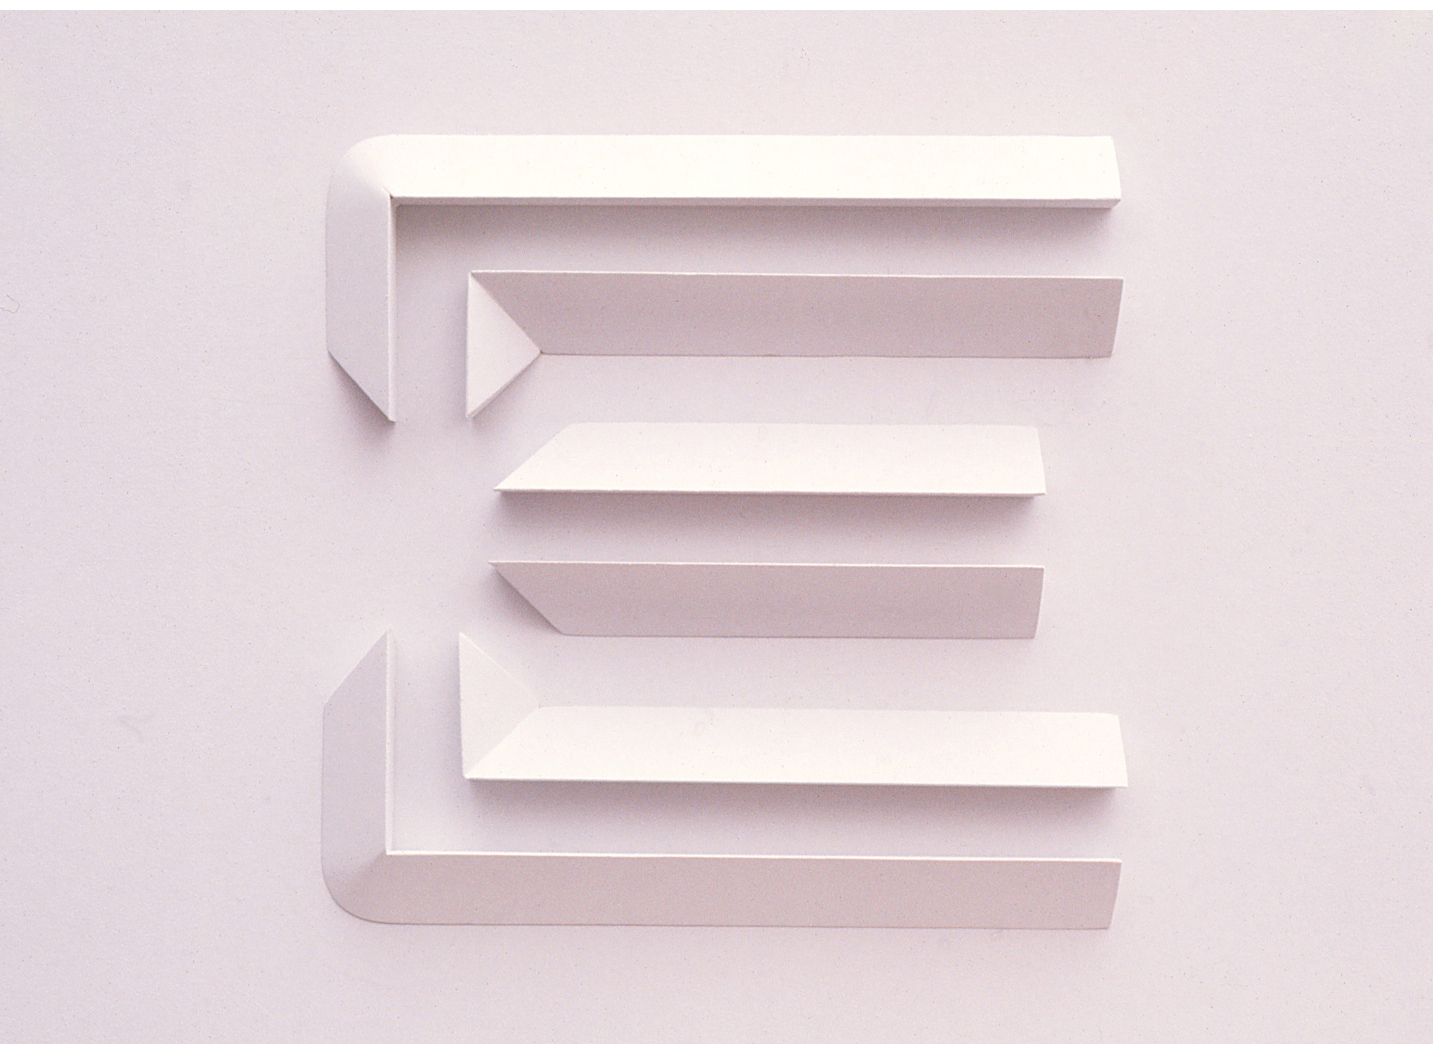 White sculpture of the E logo symbol featuring shadows to show depth and detail.